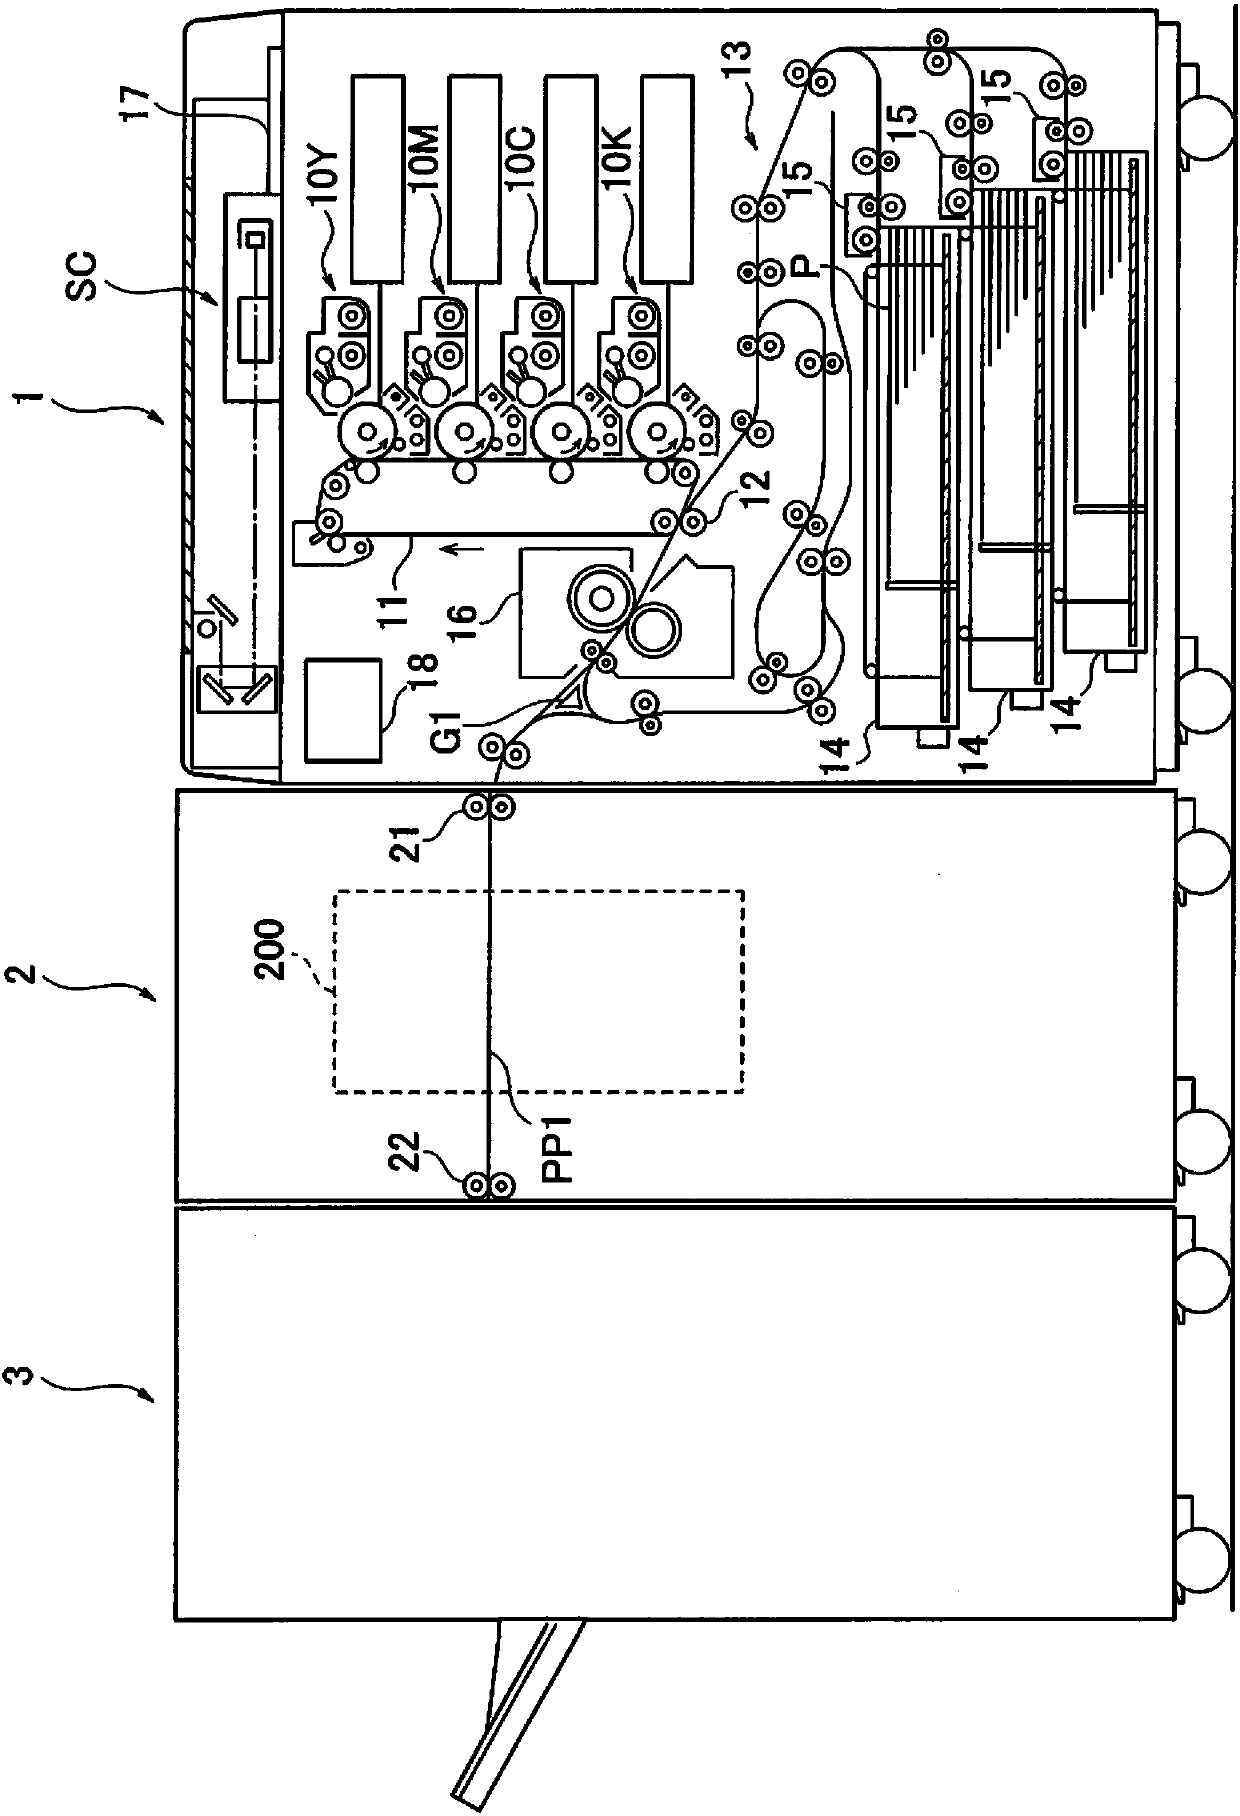 Paper humidifier and image forming system